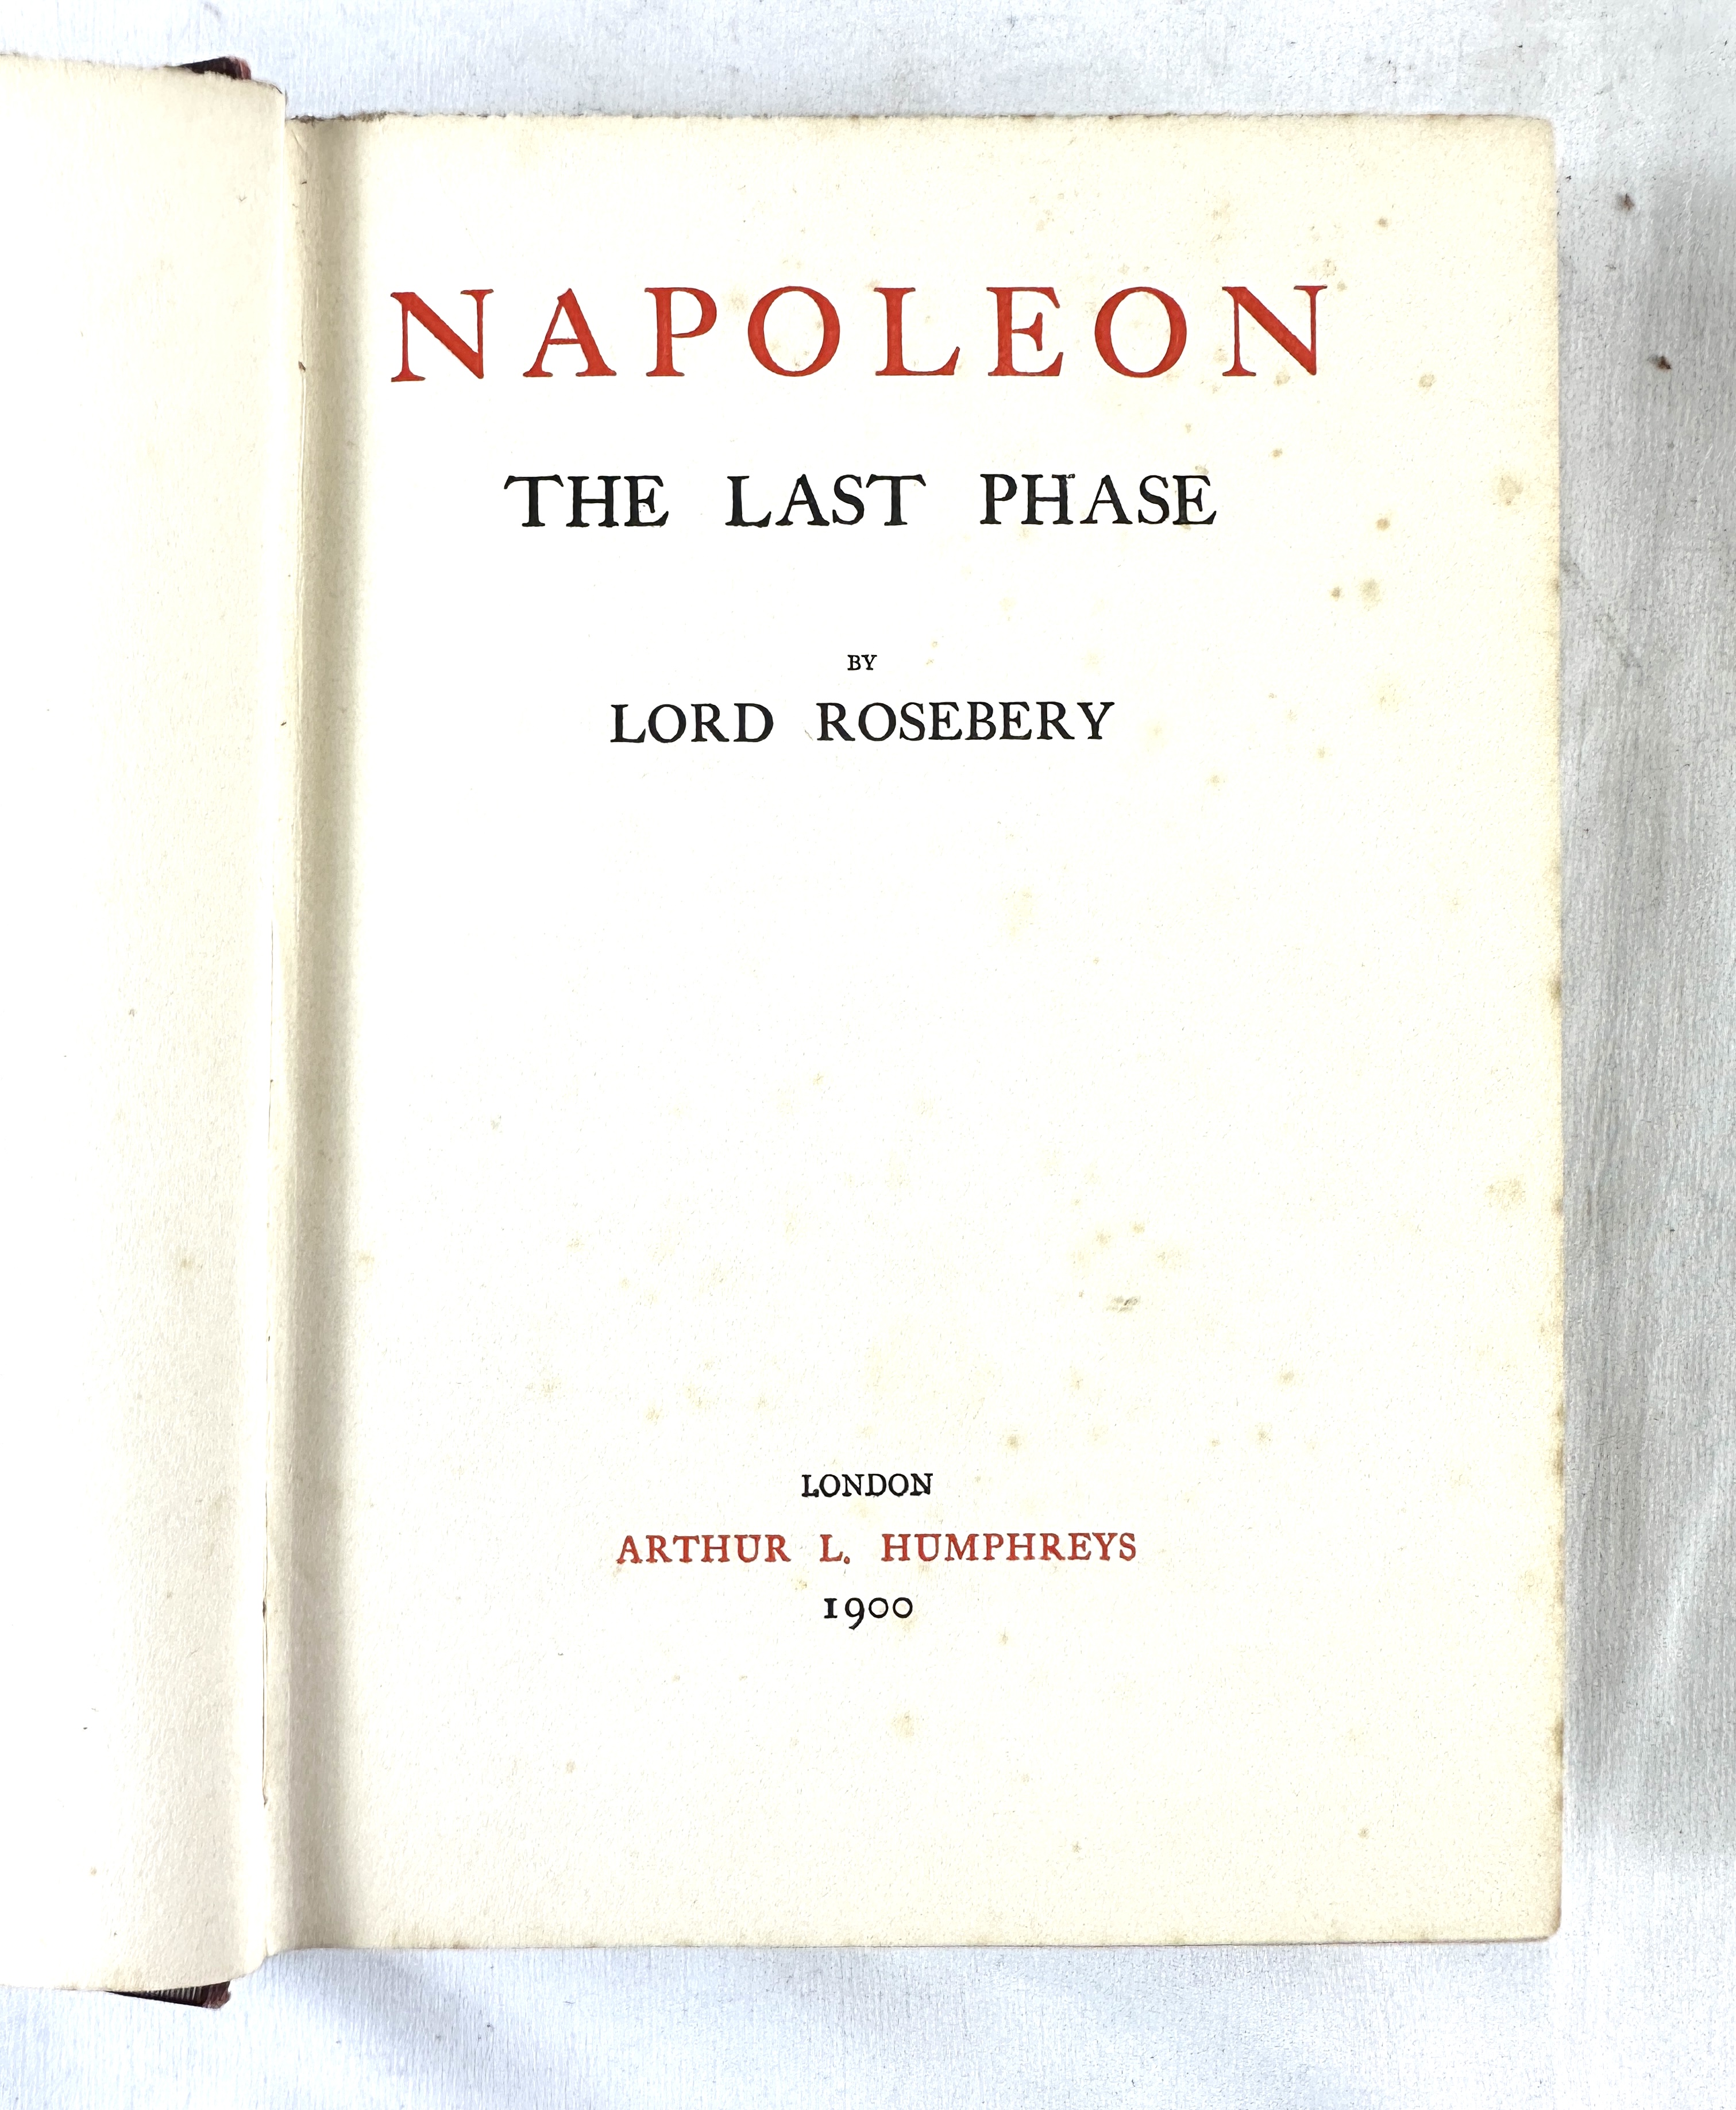 Napoleon The Last Phase by Lord Rosebery, 1900 and other books - Image 5 of 10